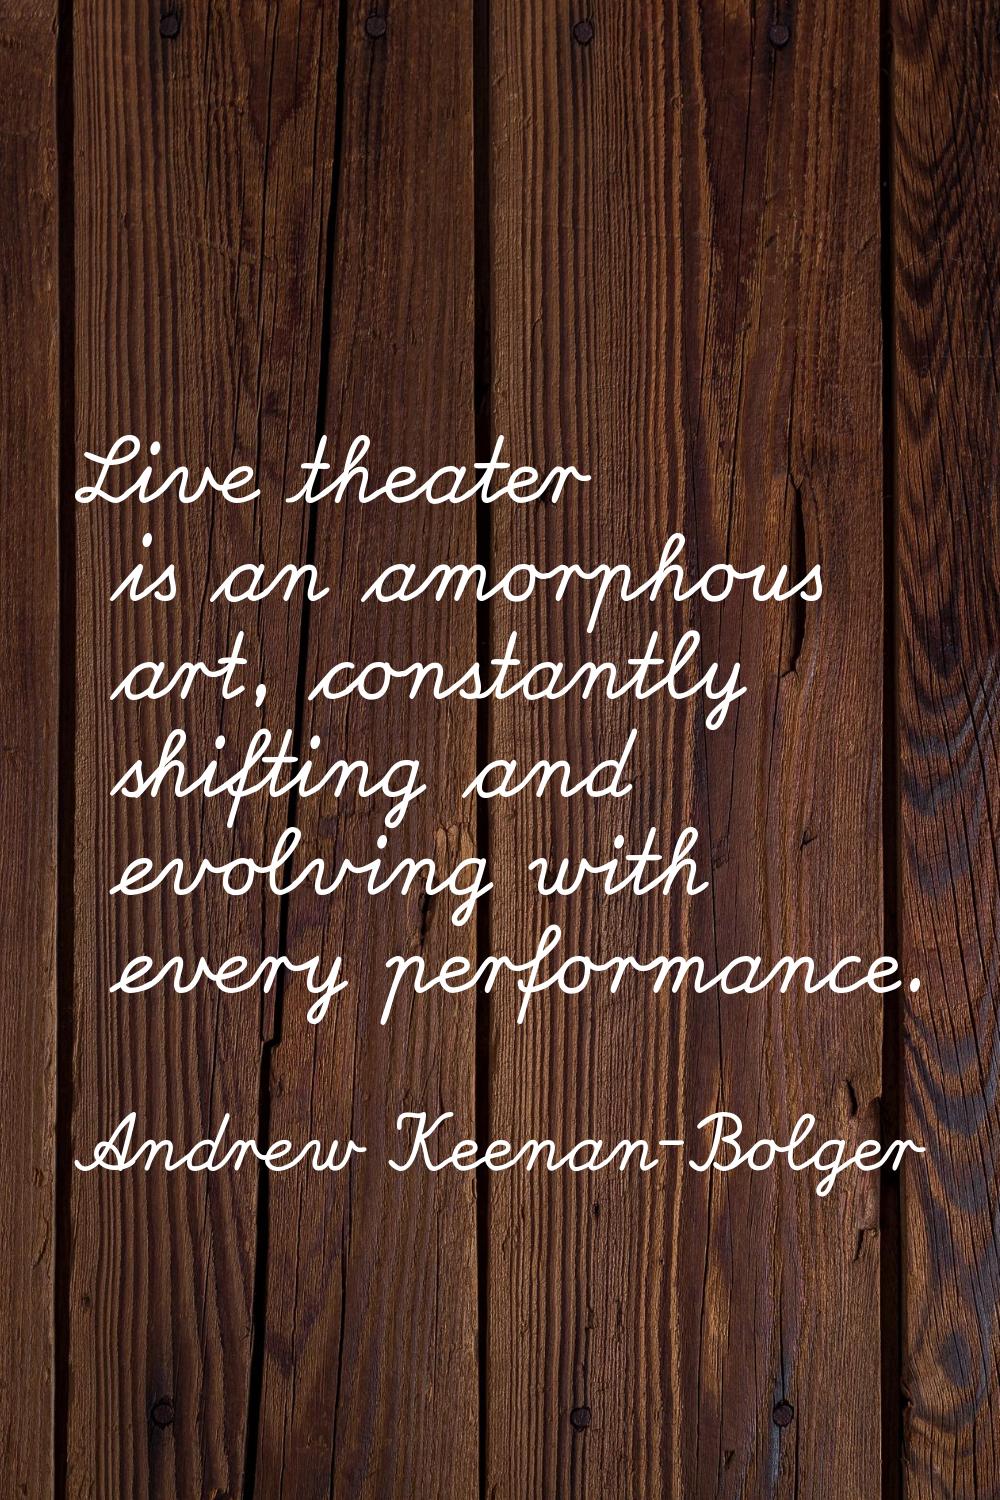 Live theater is an amorphous art, constantly shifting and evolving with every performance.